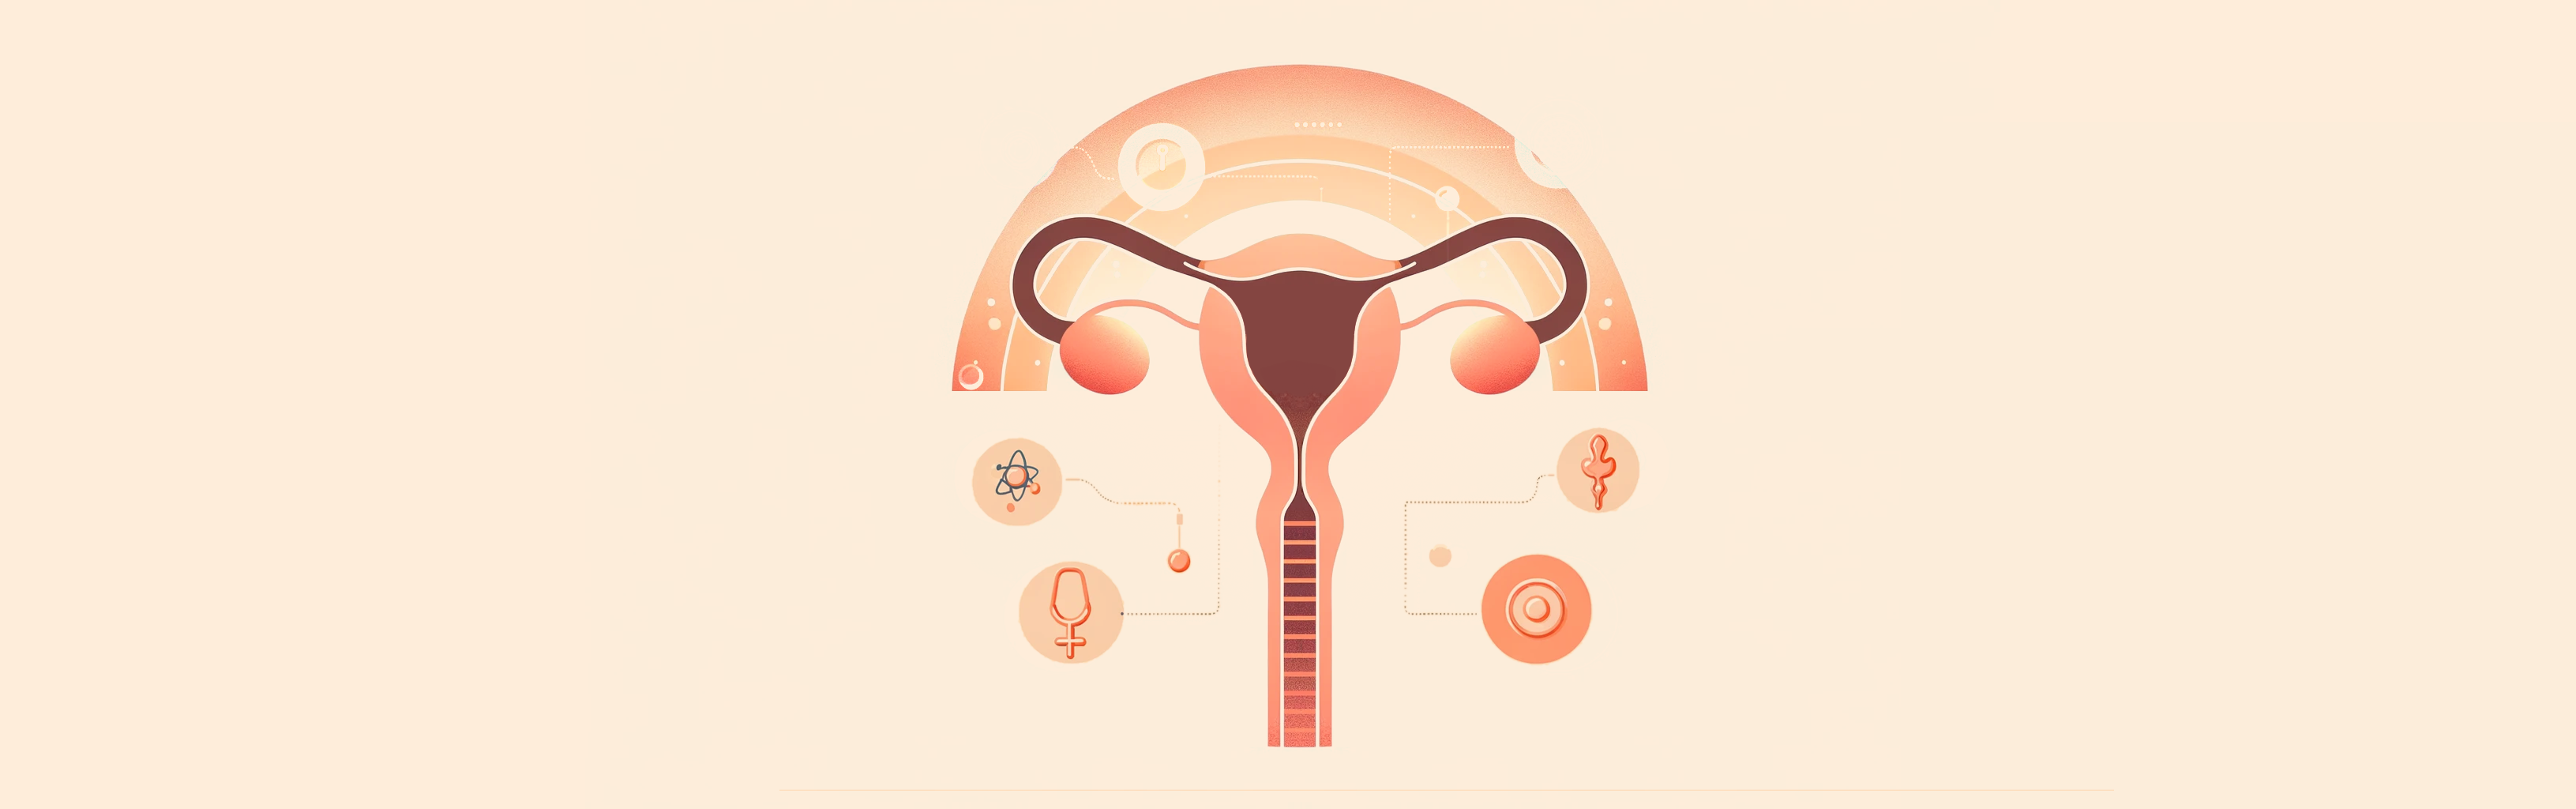 Illustration detailing the expert fertility assessment of fallopian tubes offered at London Pregnancy Clinic.